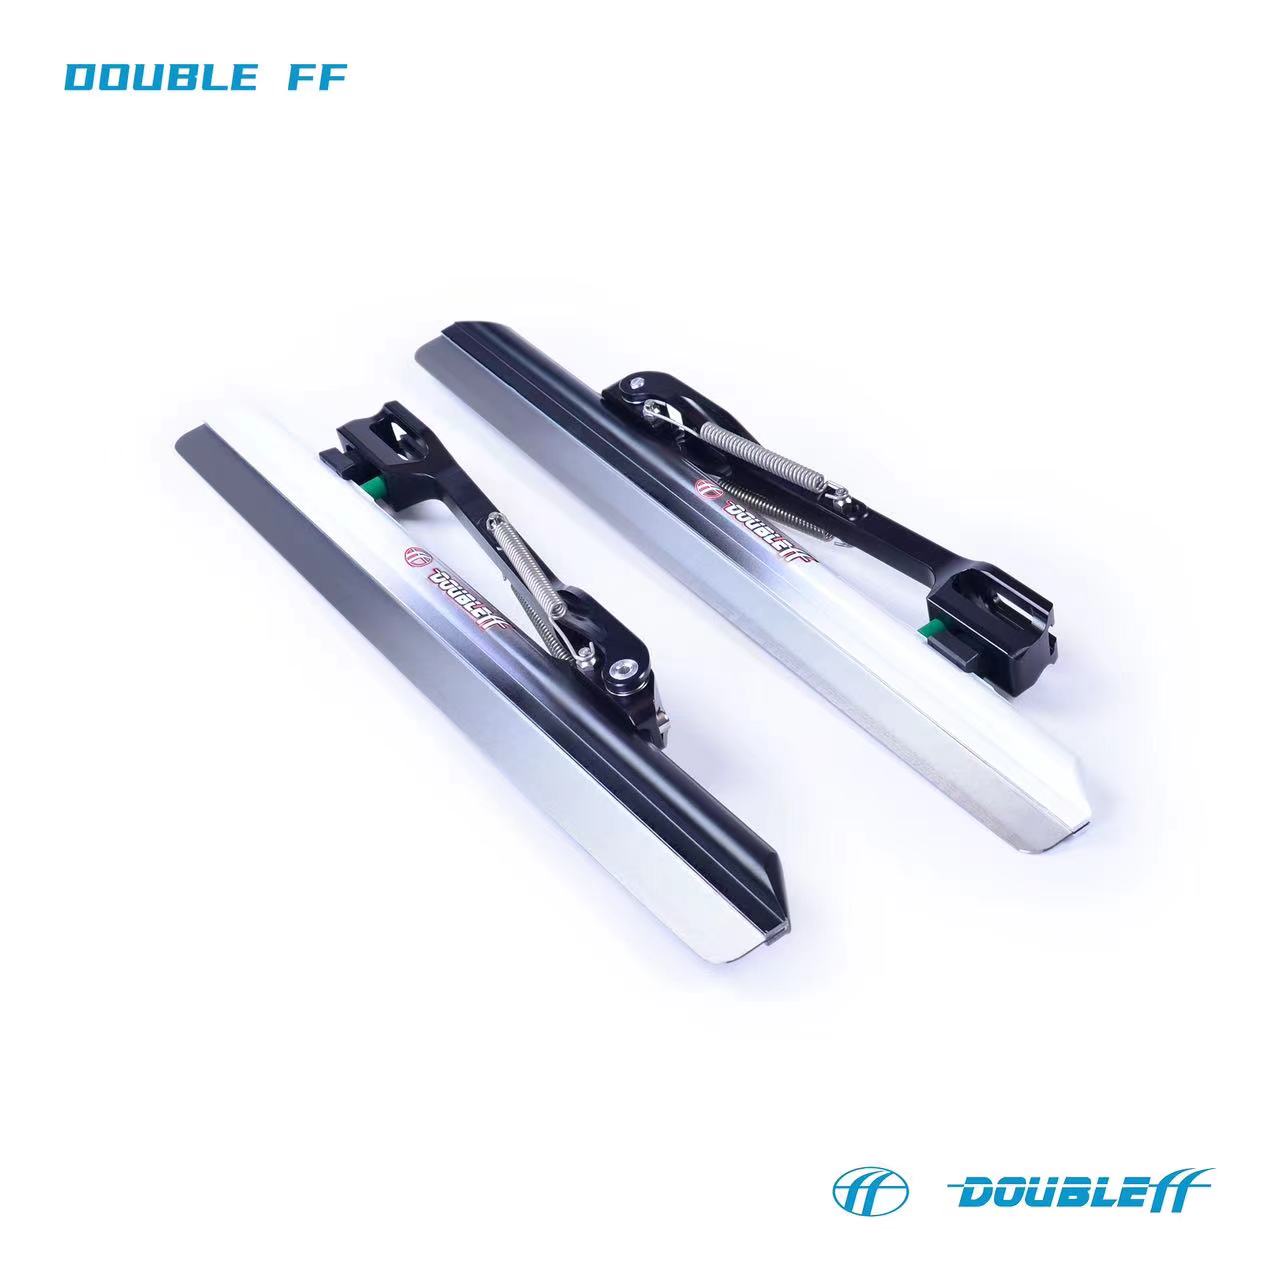 Double FF 64 HRC Long Track Ice Skate Blades CNC Aluminum 7005 Ice Skate Blades For MEN&Women Indoor/Outdoor Sports